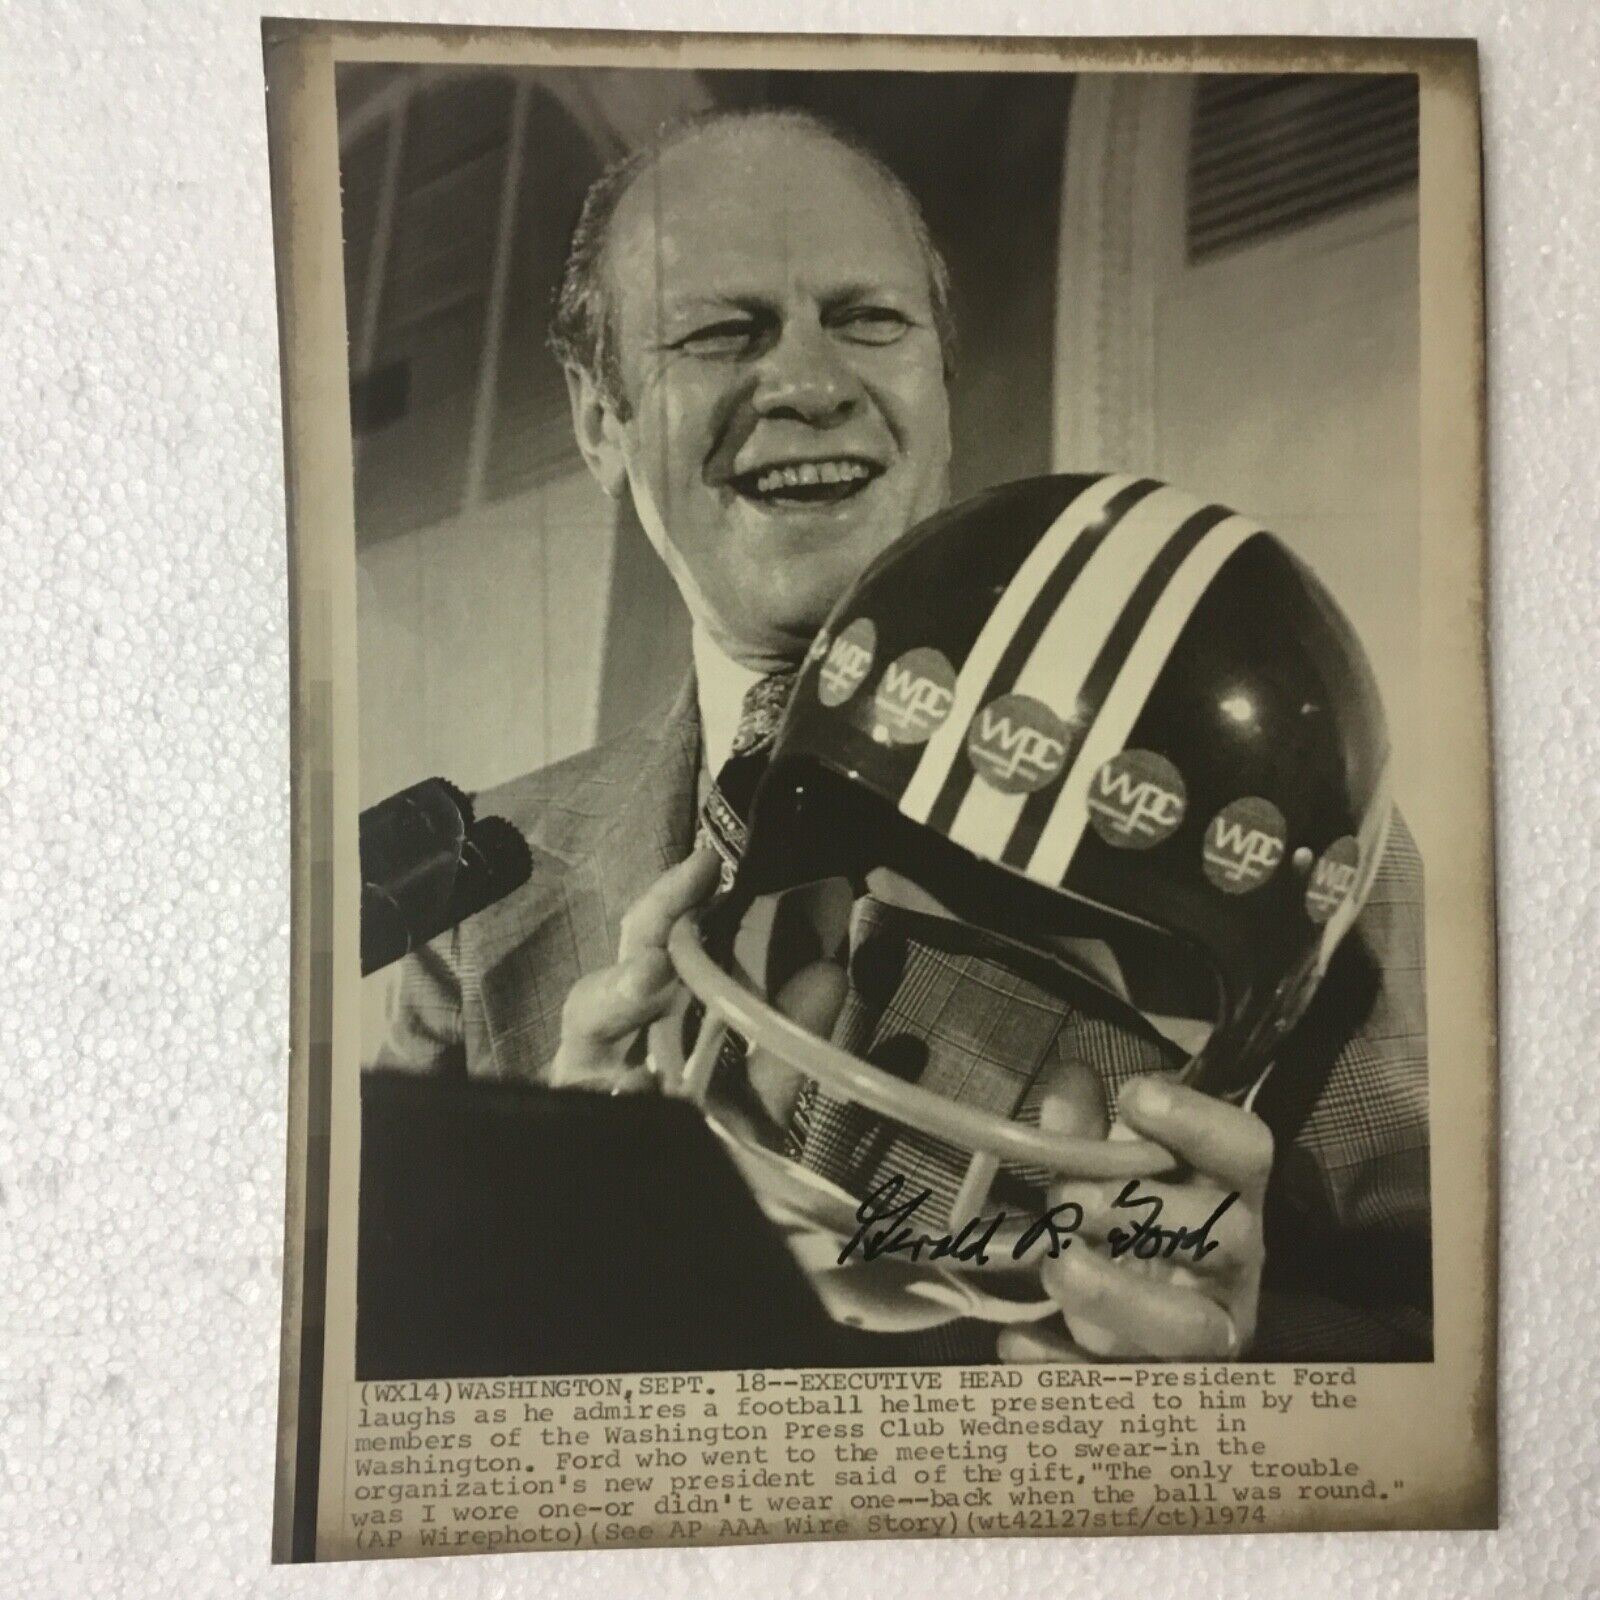 PRESIDENT GERALD R FORD AUTOGRAPHED FOOTBALL HELMET Photo Poster painting PRESENTATION PC391